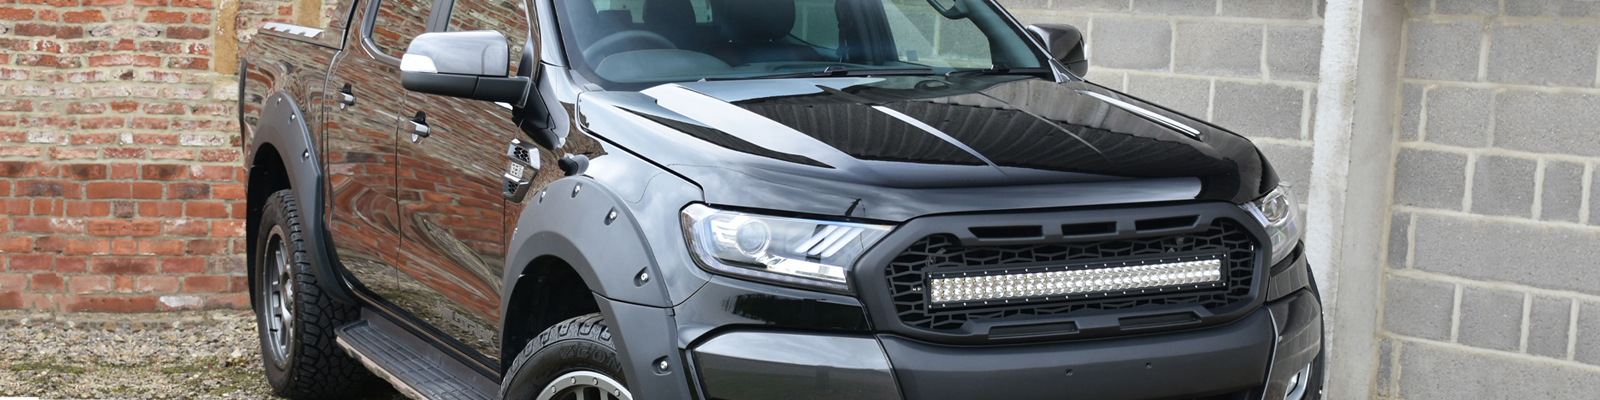 Accessories For The Ford Ranger Double Cab 2016-2019